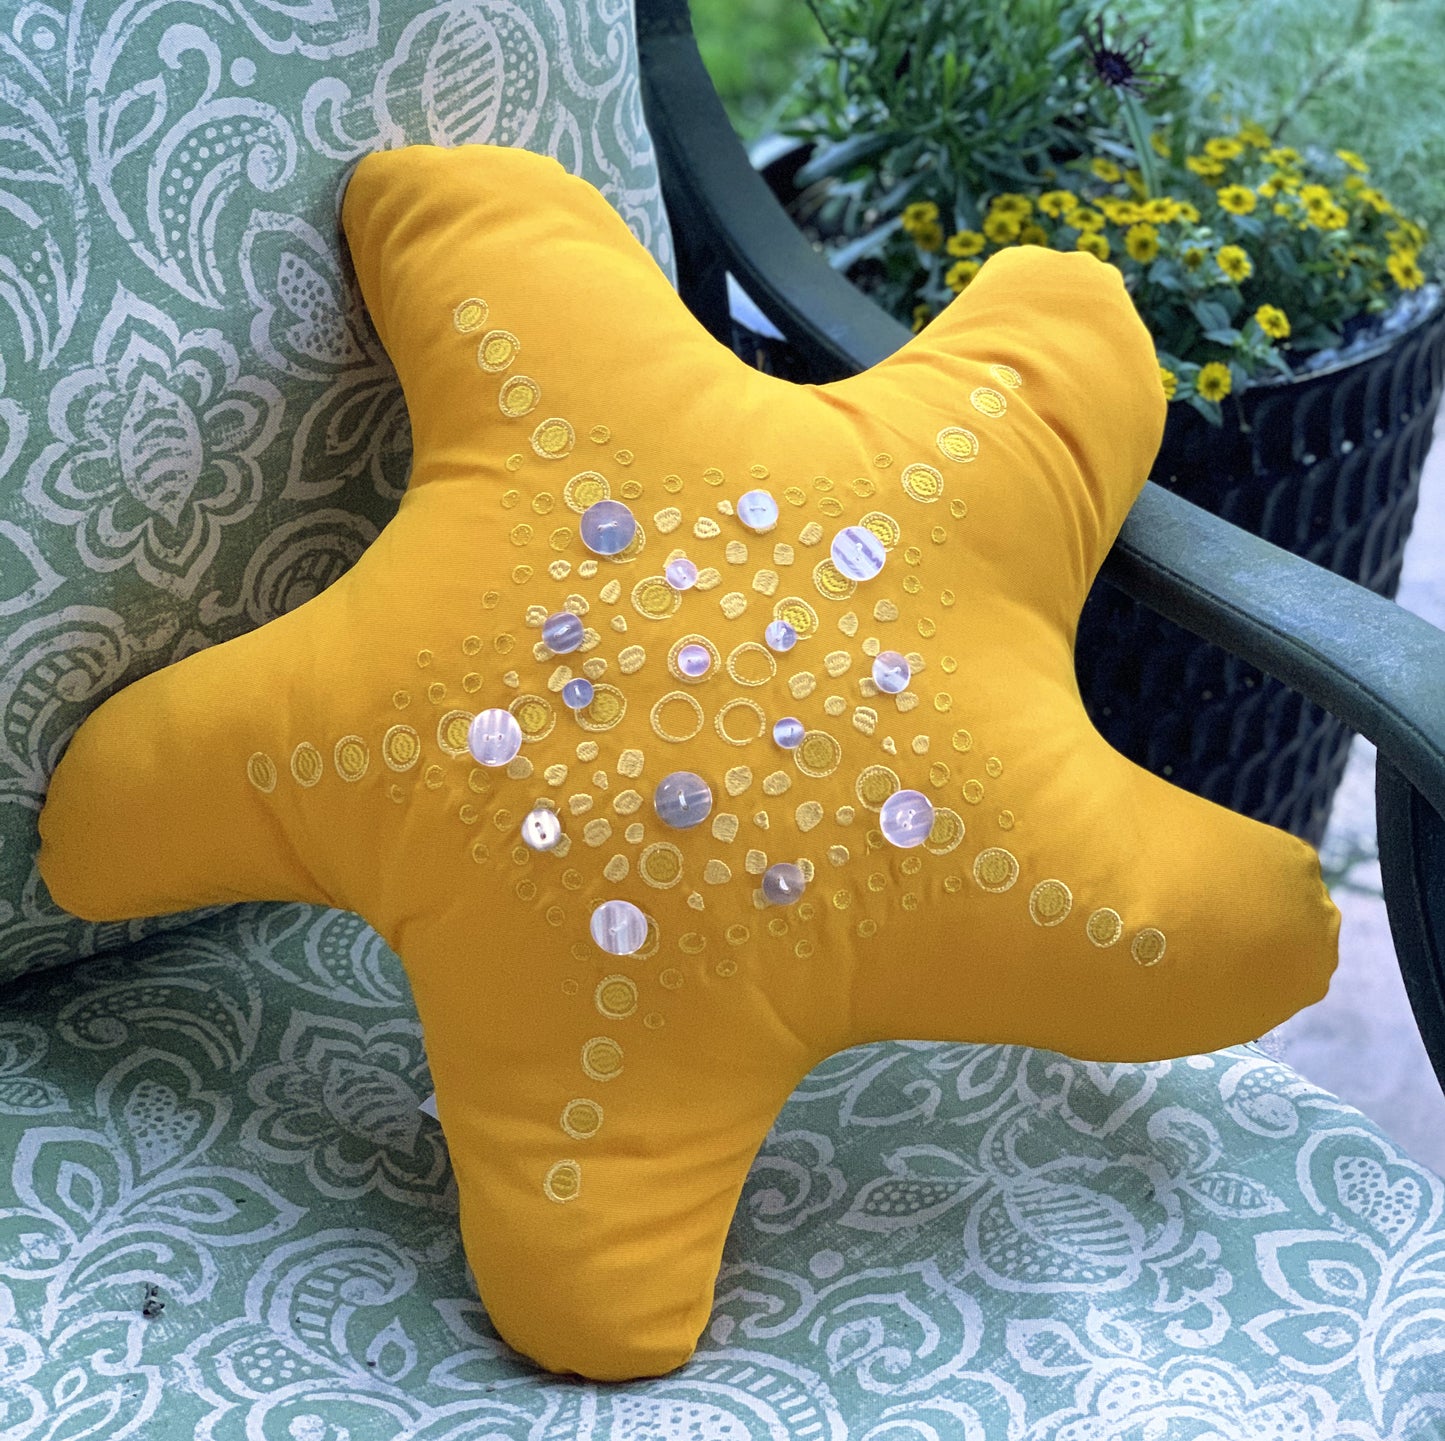 Marigold Shaped Sea Star pillow styled on an outdoor pillow.